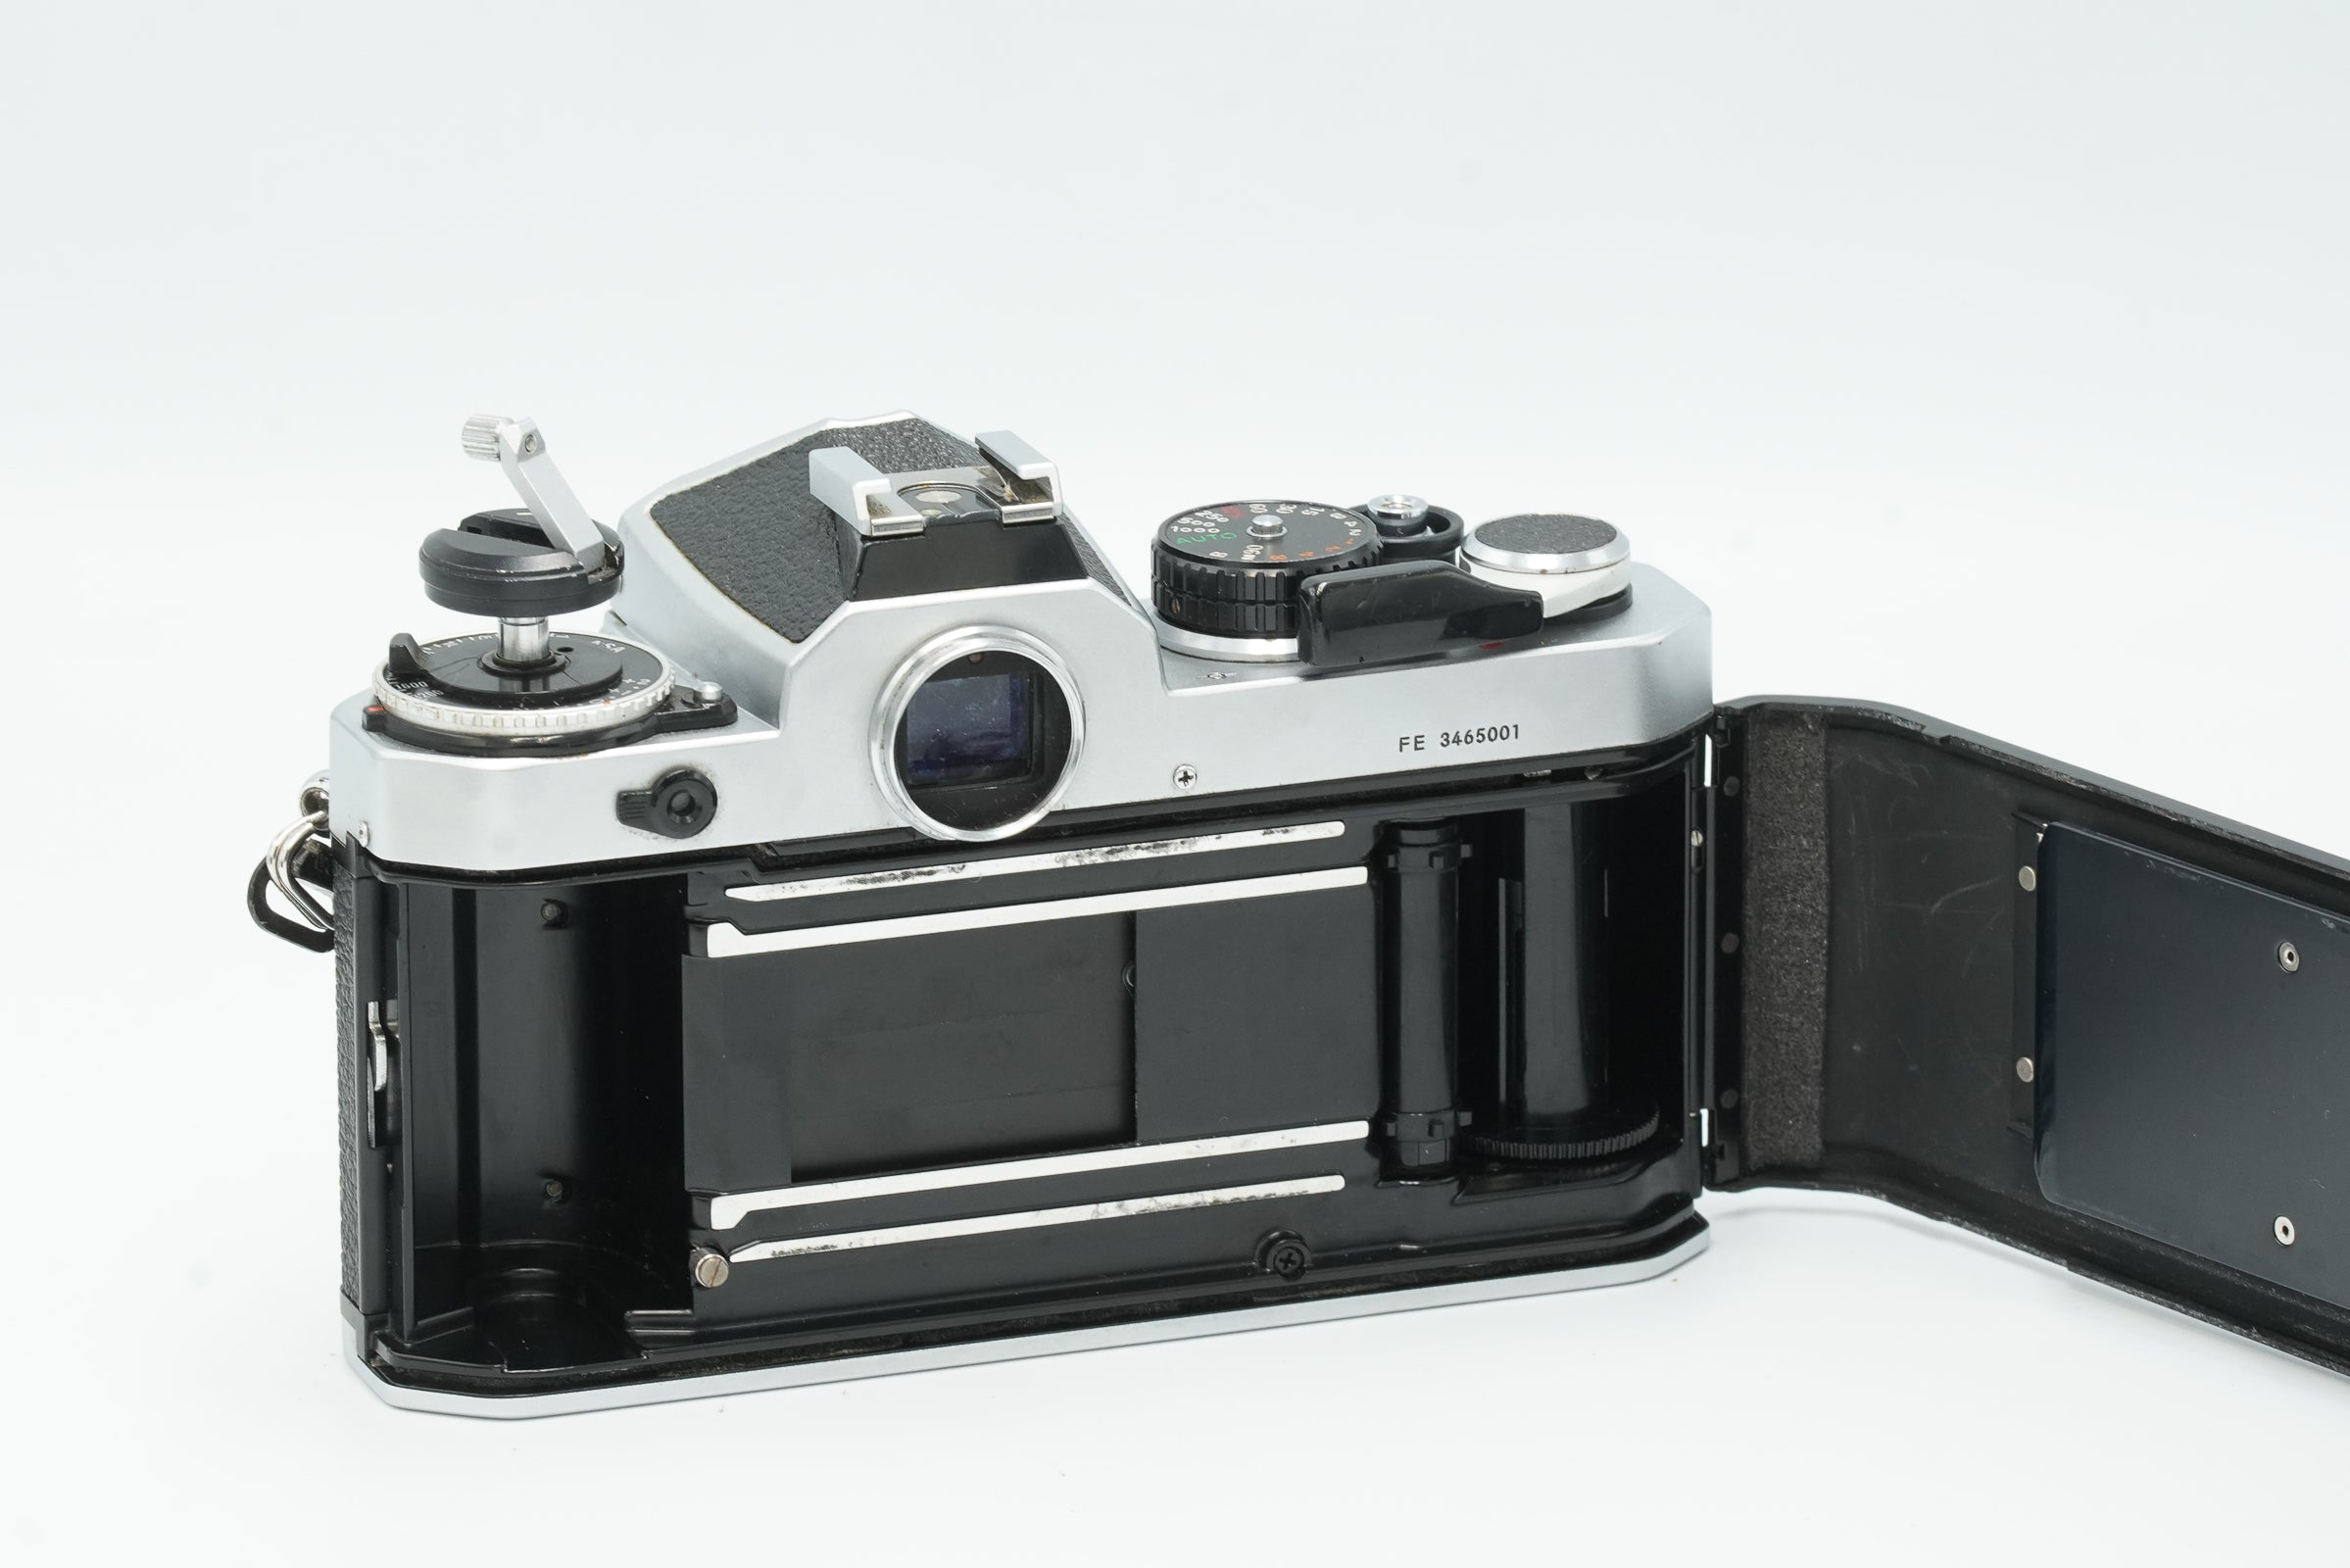 Nikon FE, silver, with lens options